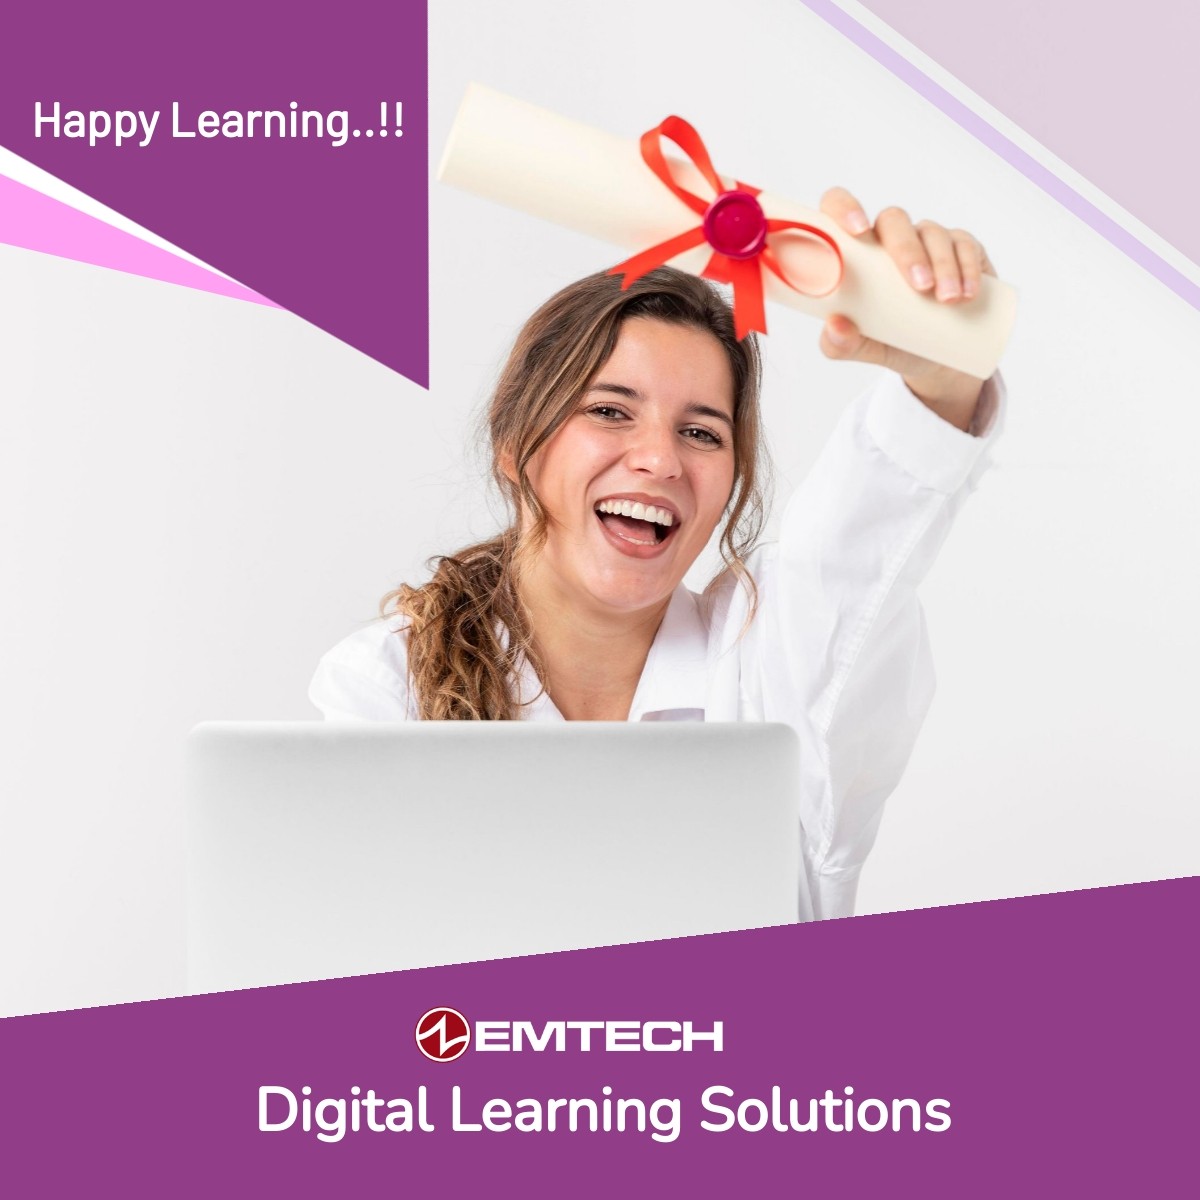 May your organization's learning and development goals be achieved with Emtech's digital learning solutions!

Happy Learning! 🎓

#employeeengagement #digitallerning #learninganddevelopment #happylearning